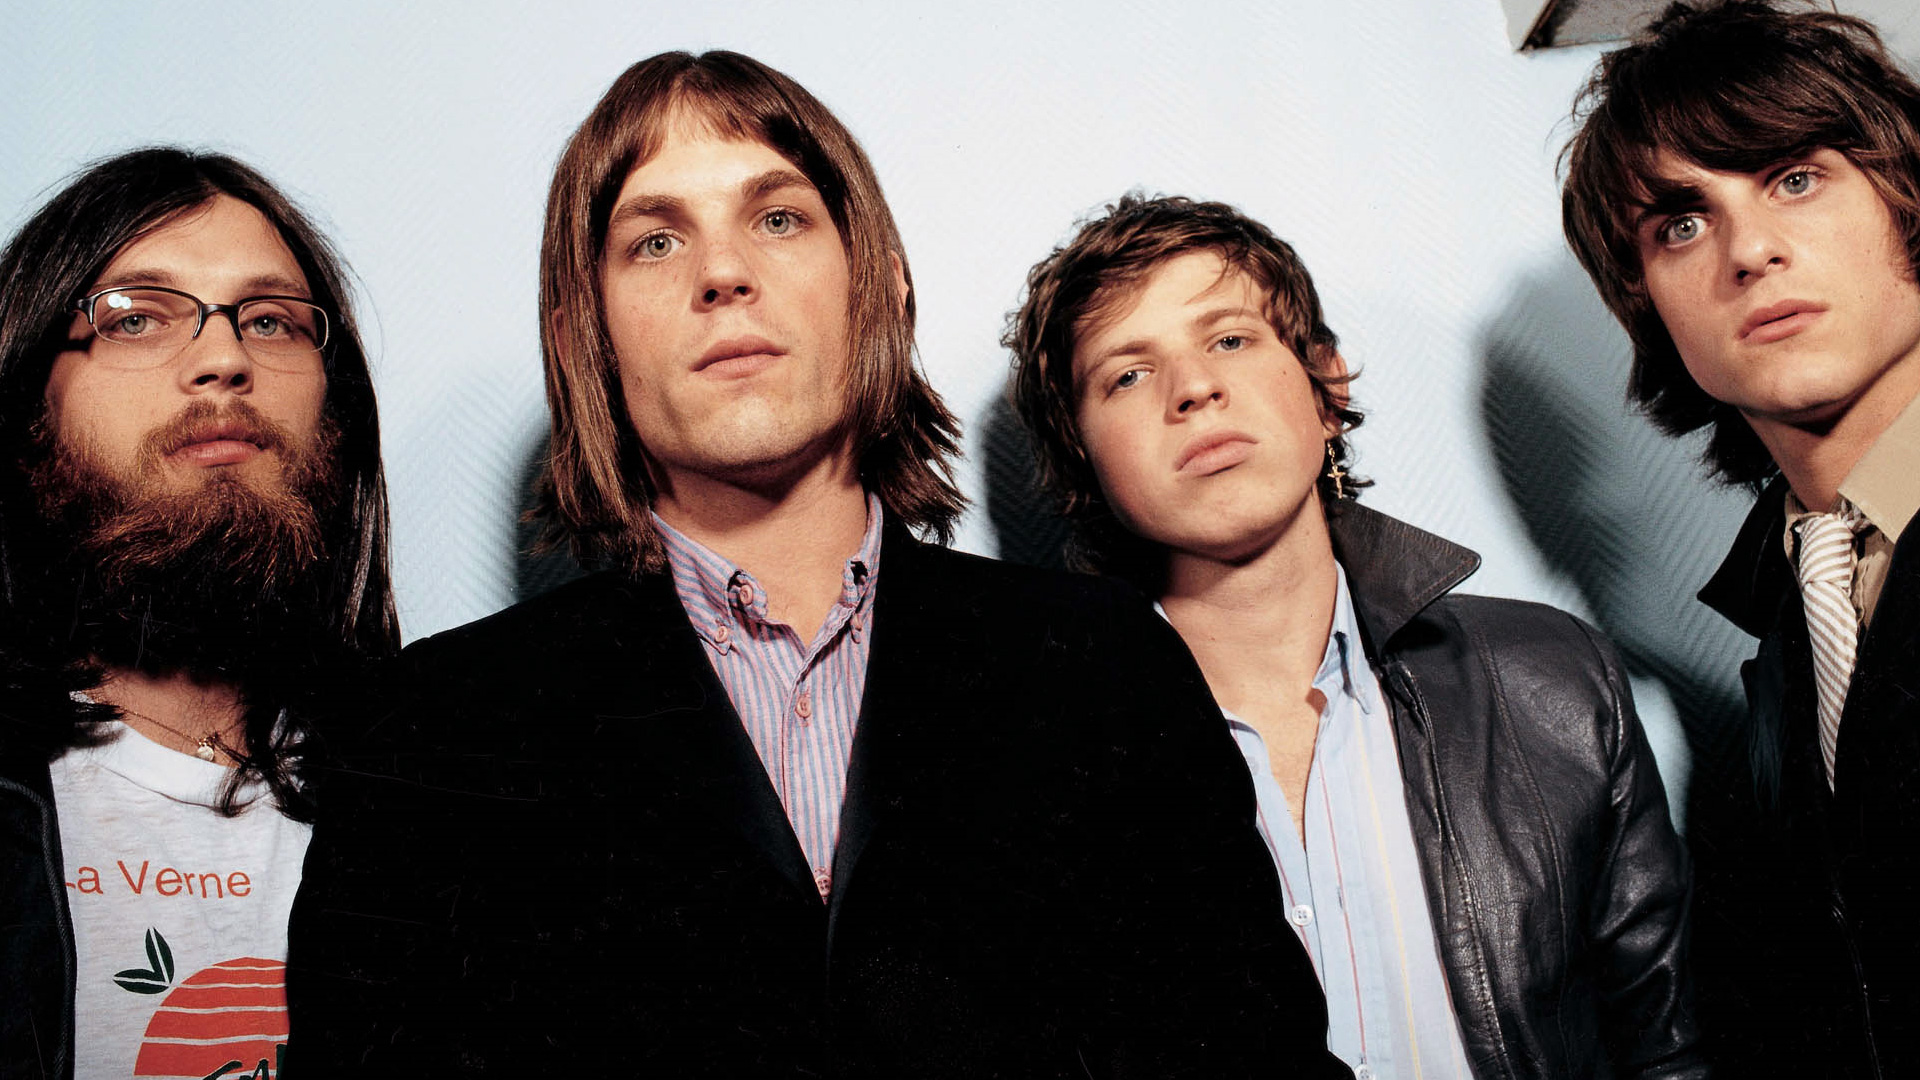 Kings Of Leon 20026 1920x1080 px